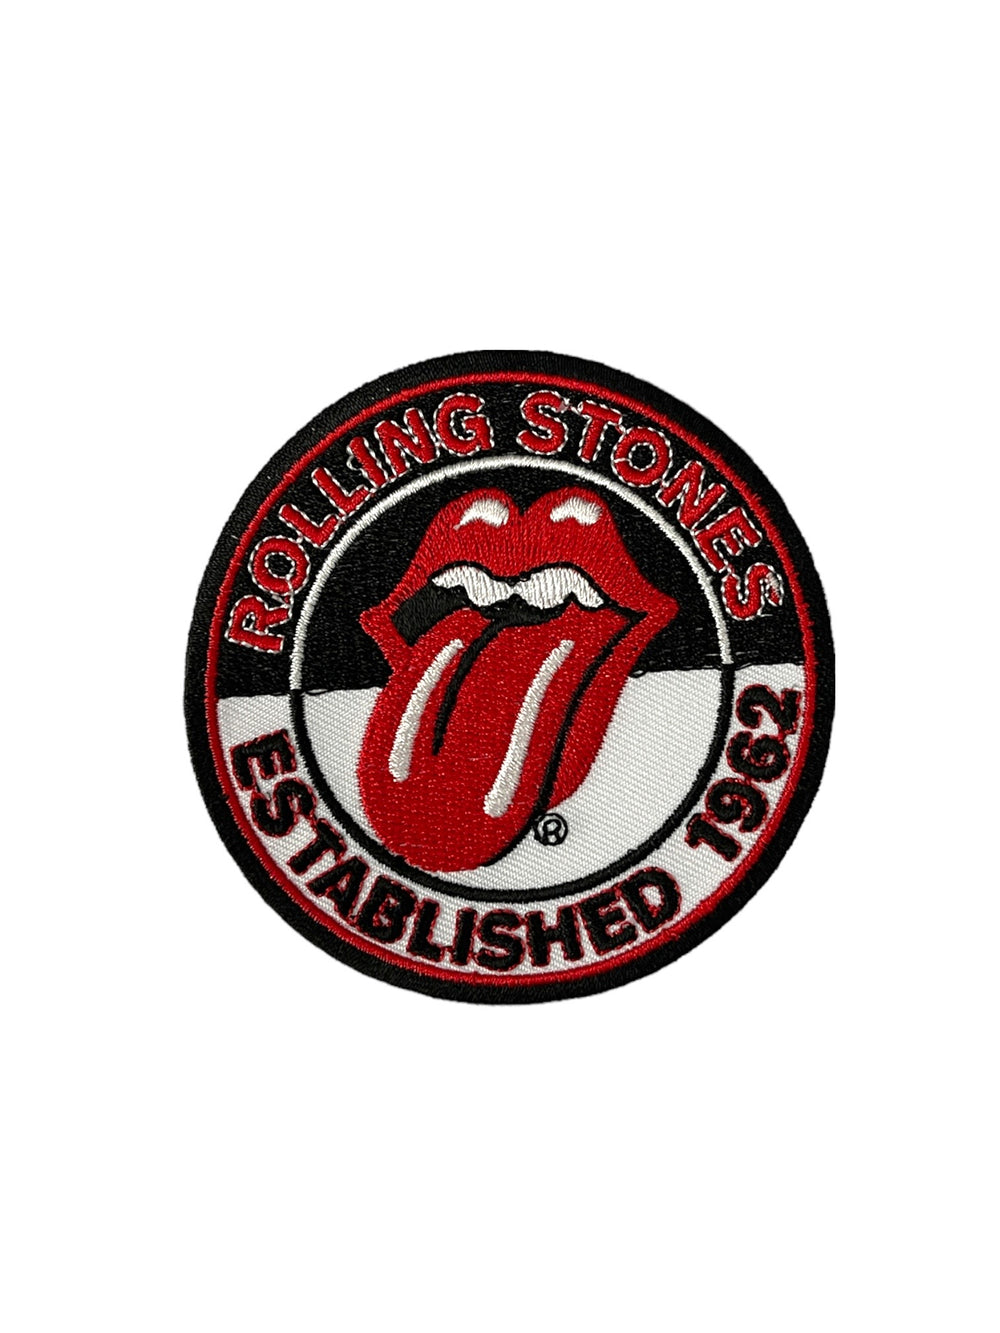 Rolling Stones The Established 1962 Version 1 Official Woven Patch Brand New